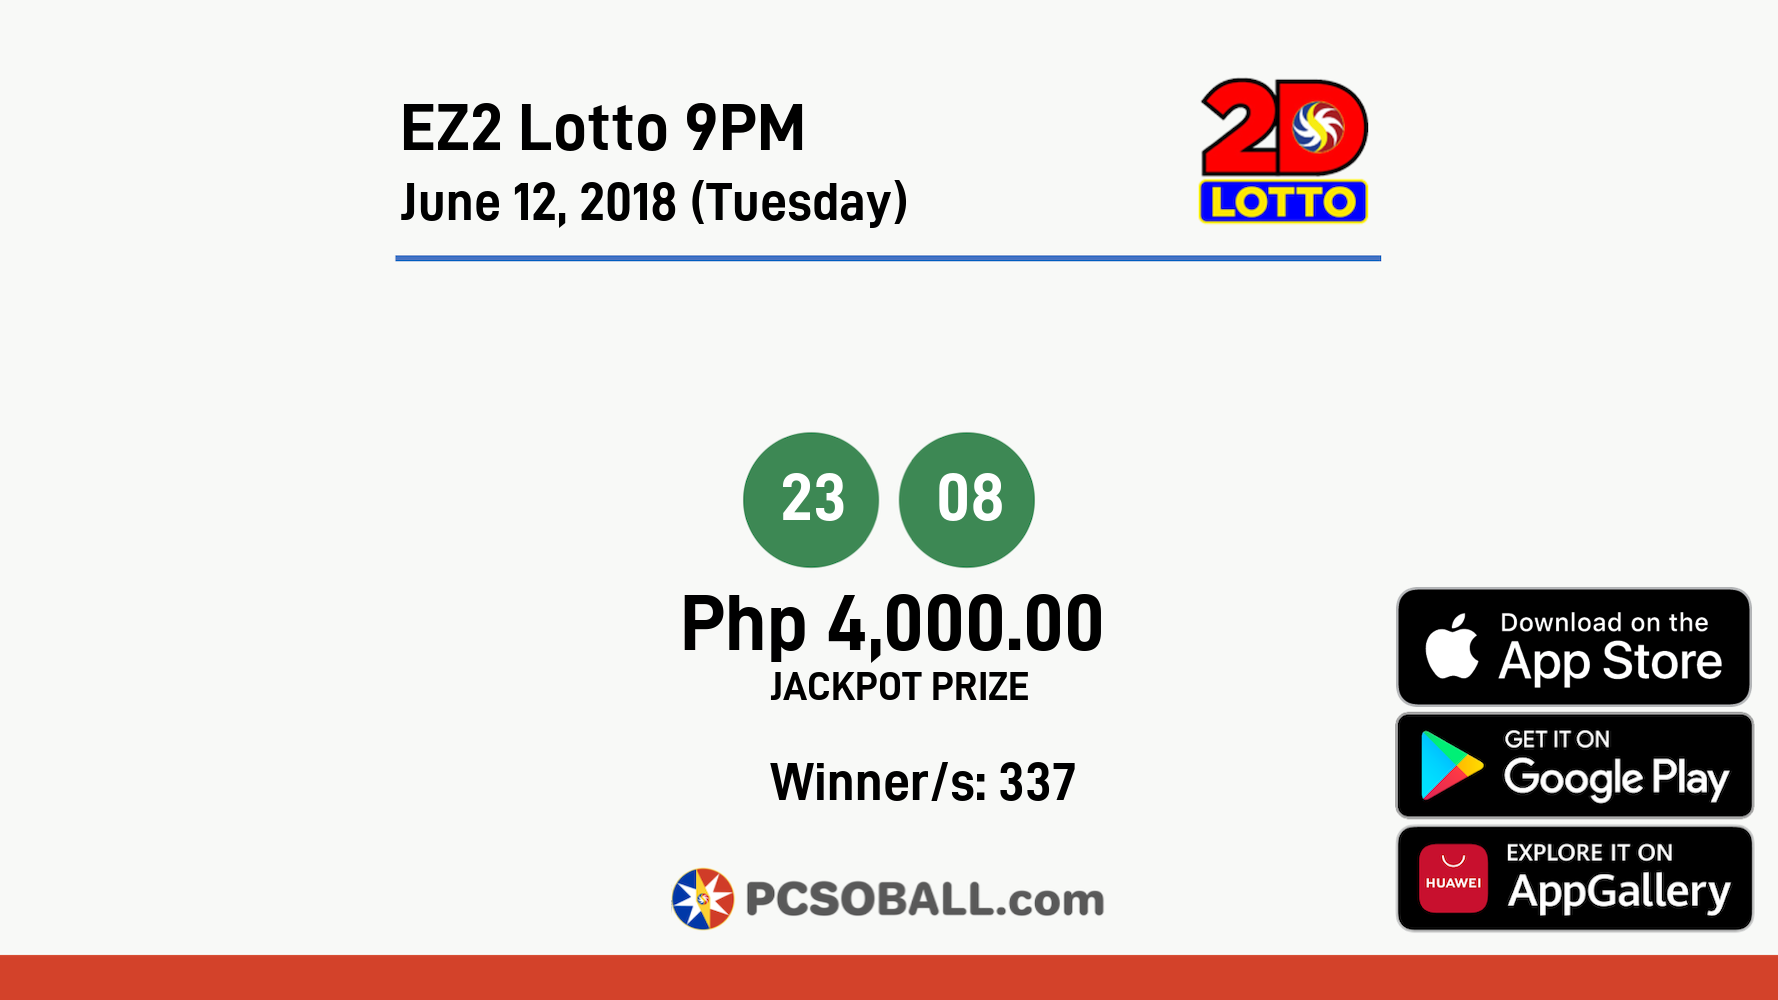 EZ2 Lotto 9PM June 12, 2018 (Tuesday) Result